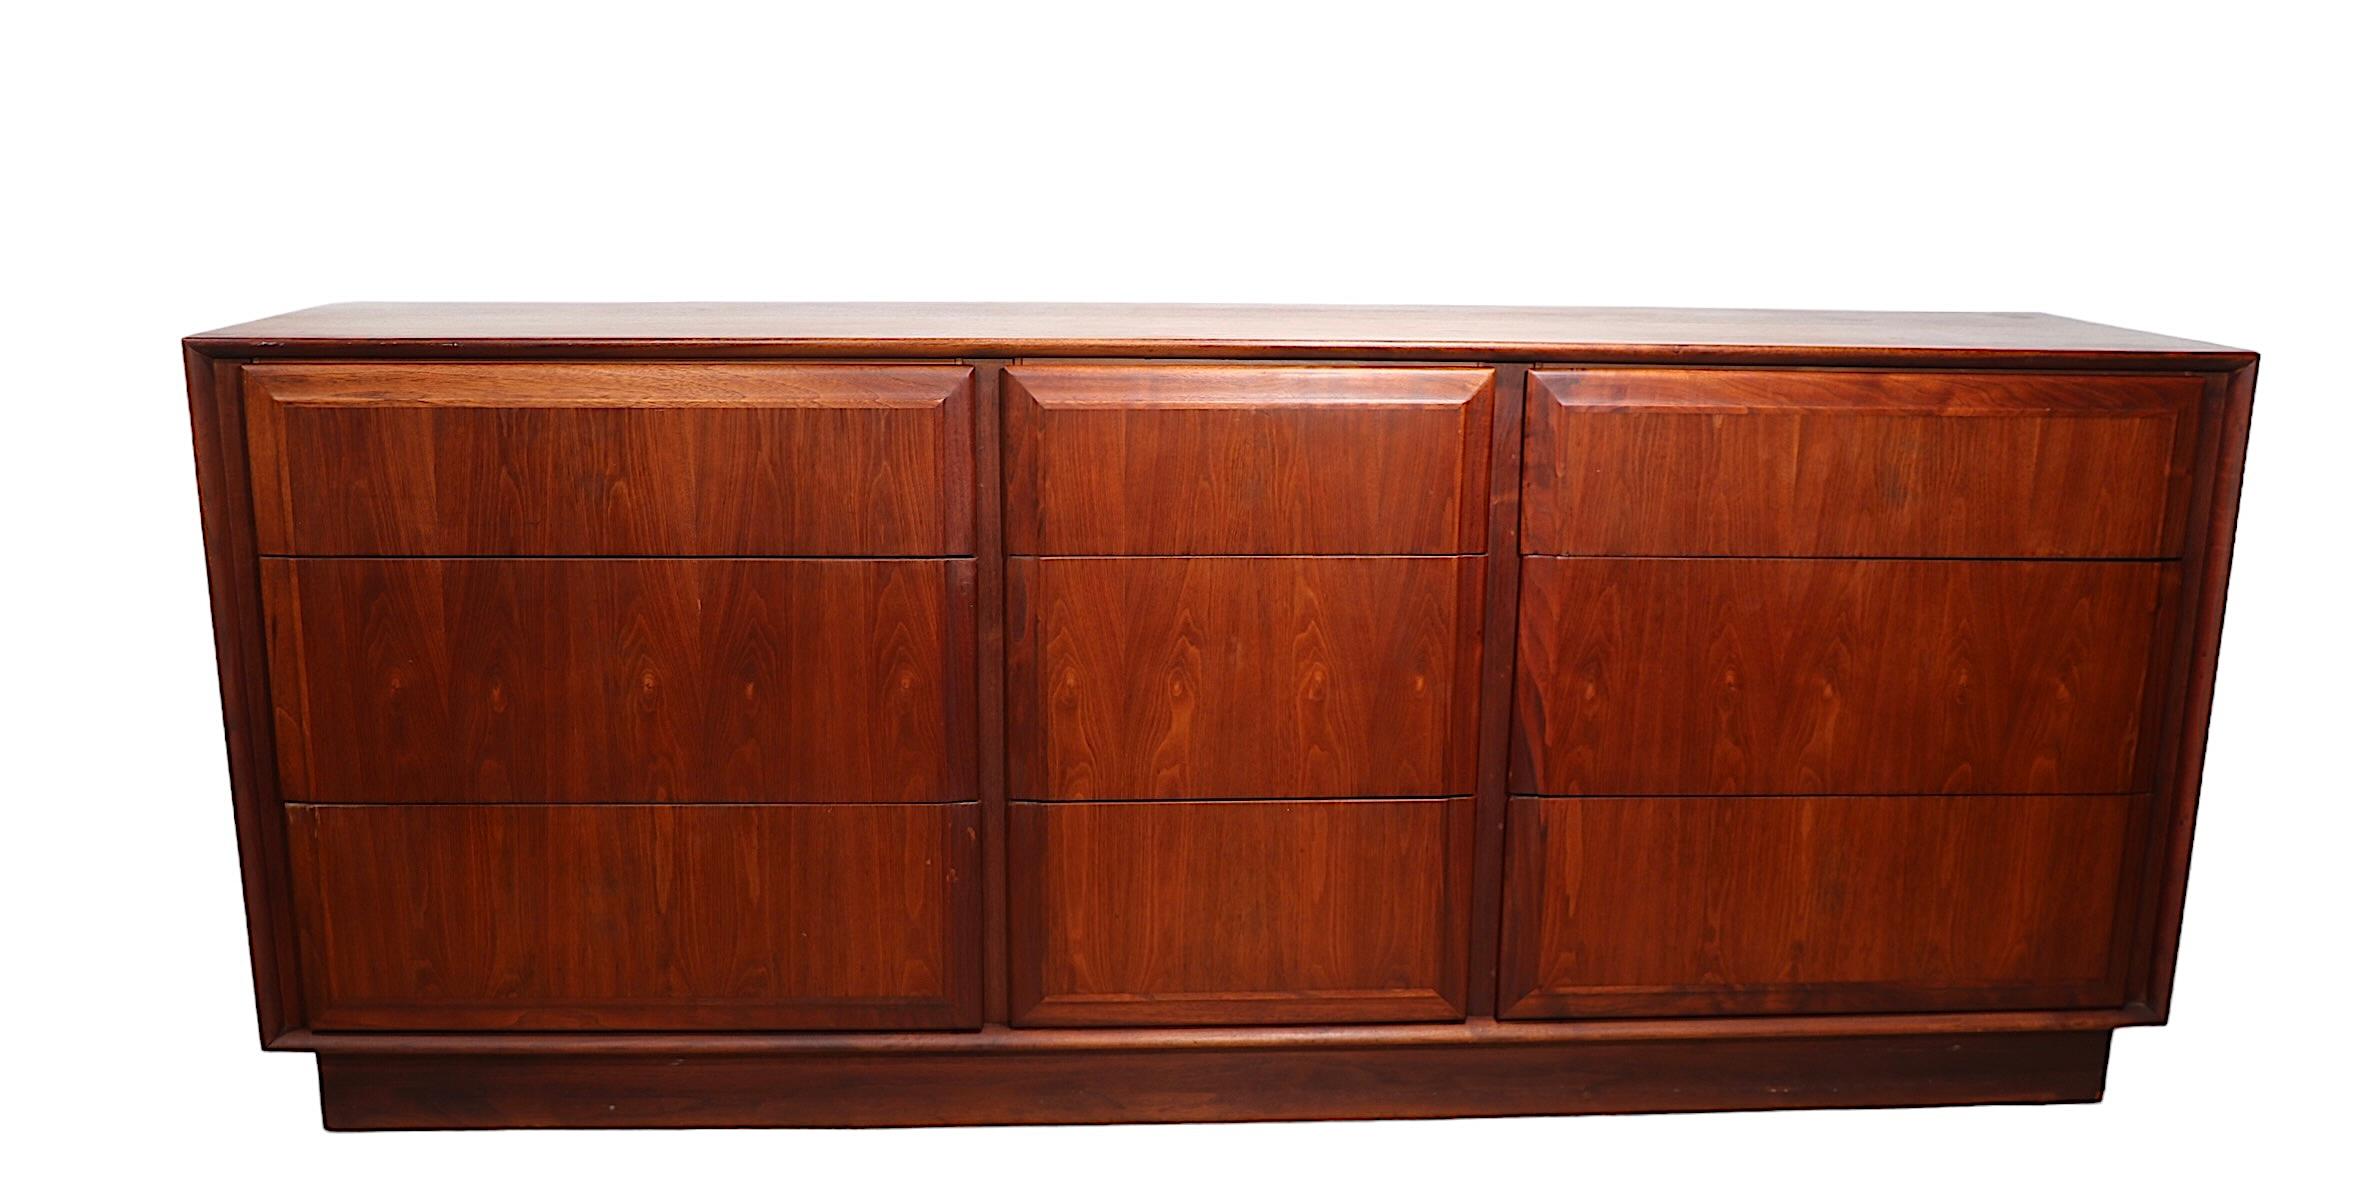 Chic architectural large nine drawer dresser, made by Dillingham, design attributed to Milo Baughman, retailed by Maurice Villency, c. 1960-1970's. This impressive chest features three banks of three drawers, the larger drawers ( 25.5 in. W ) flank